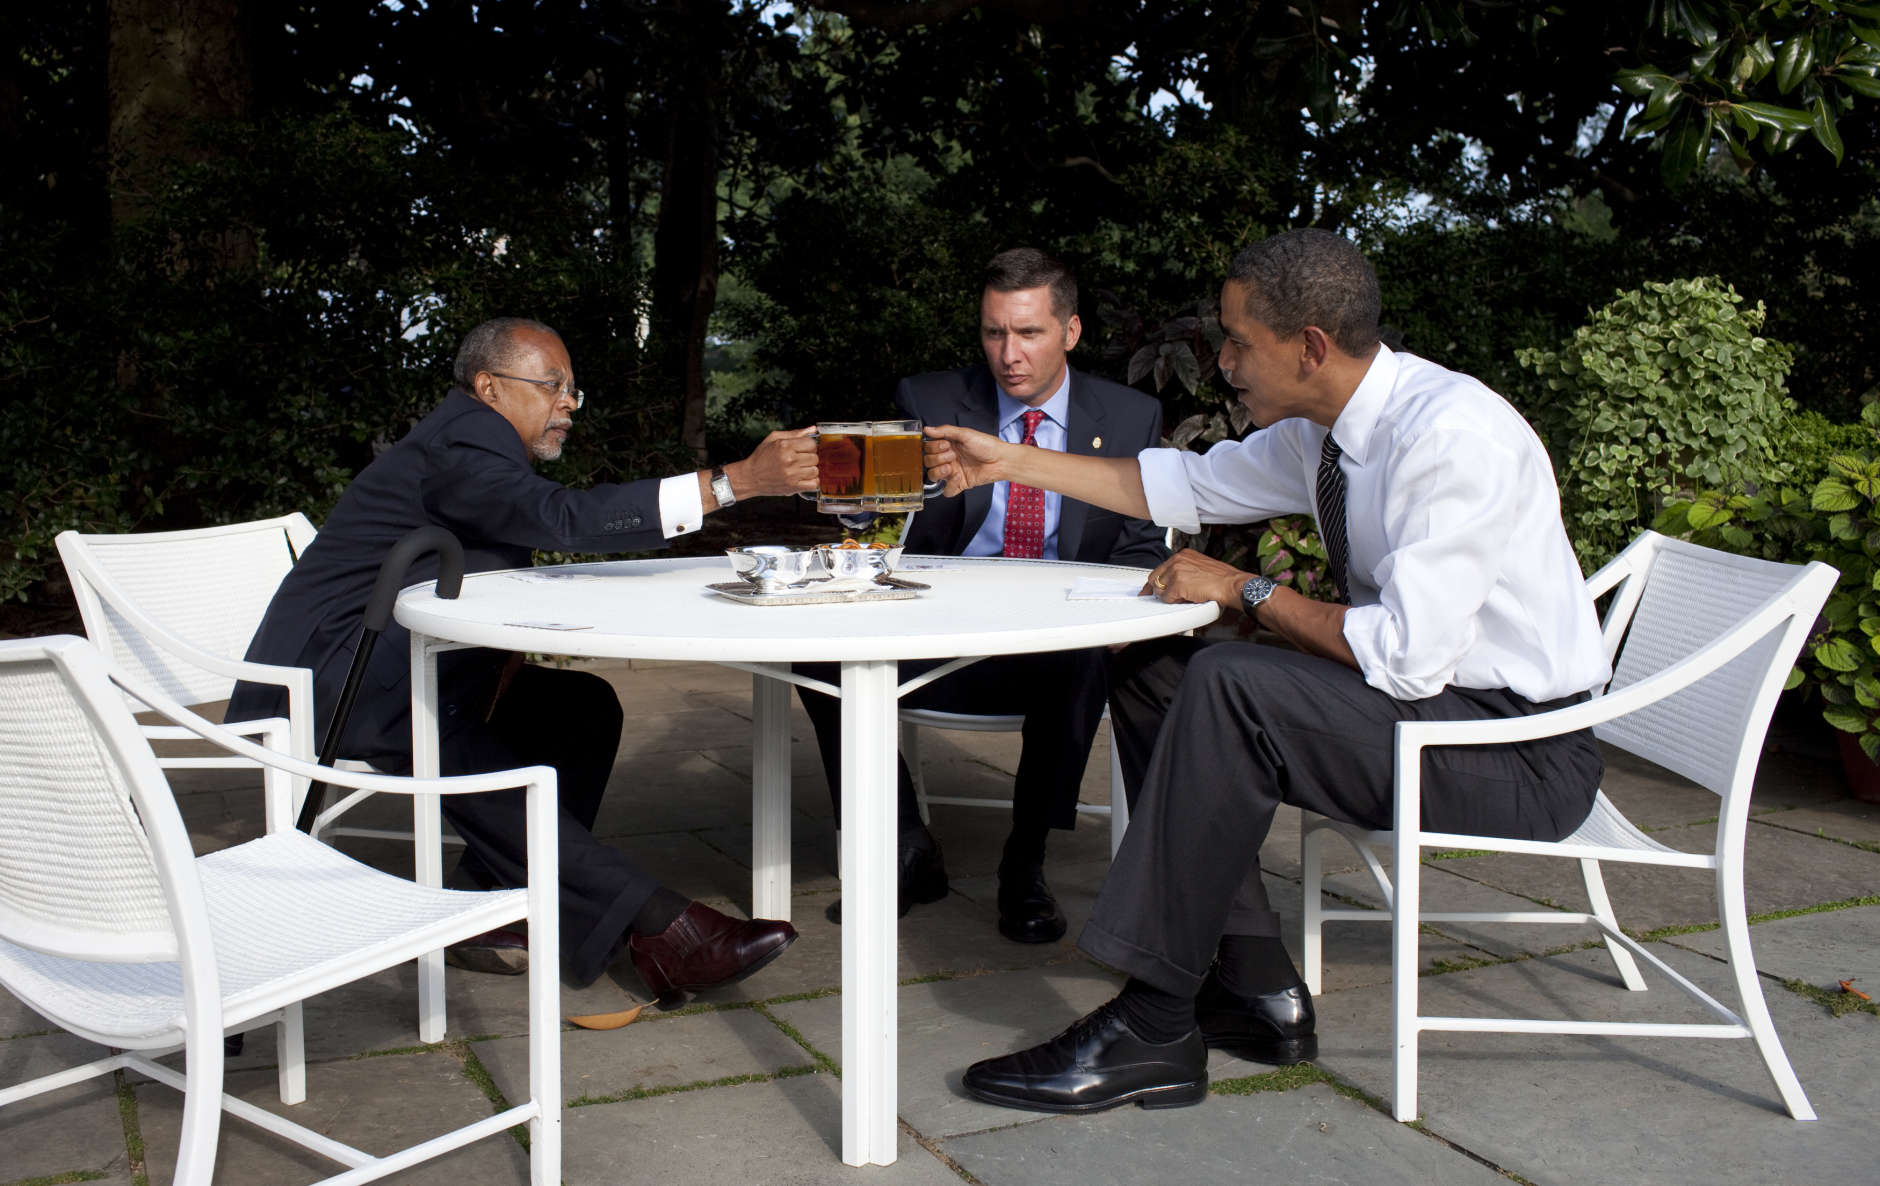 President Barack Obama, Professor Henry Louis Gates Jr. and Sergeant James Crowley meet in the Rose Garden of the White House, July 30, 2009. Official White House Photo by Pete Souza